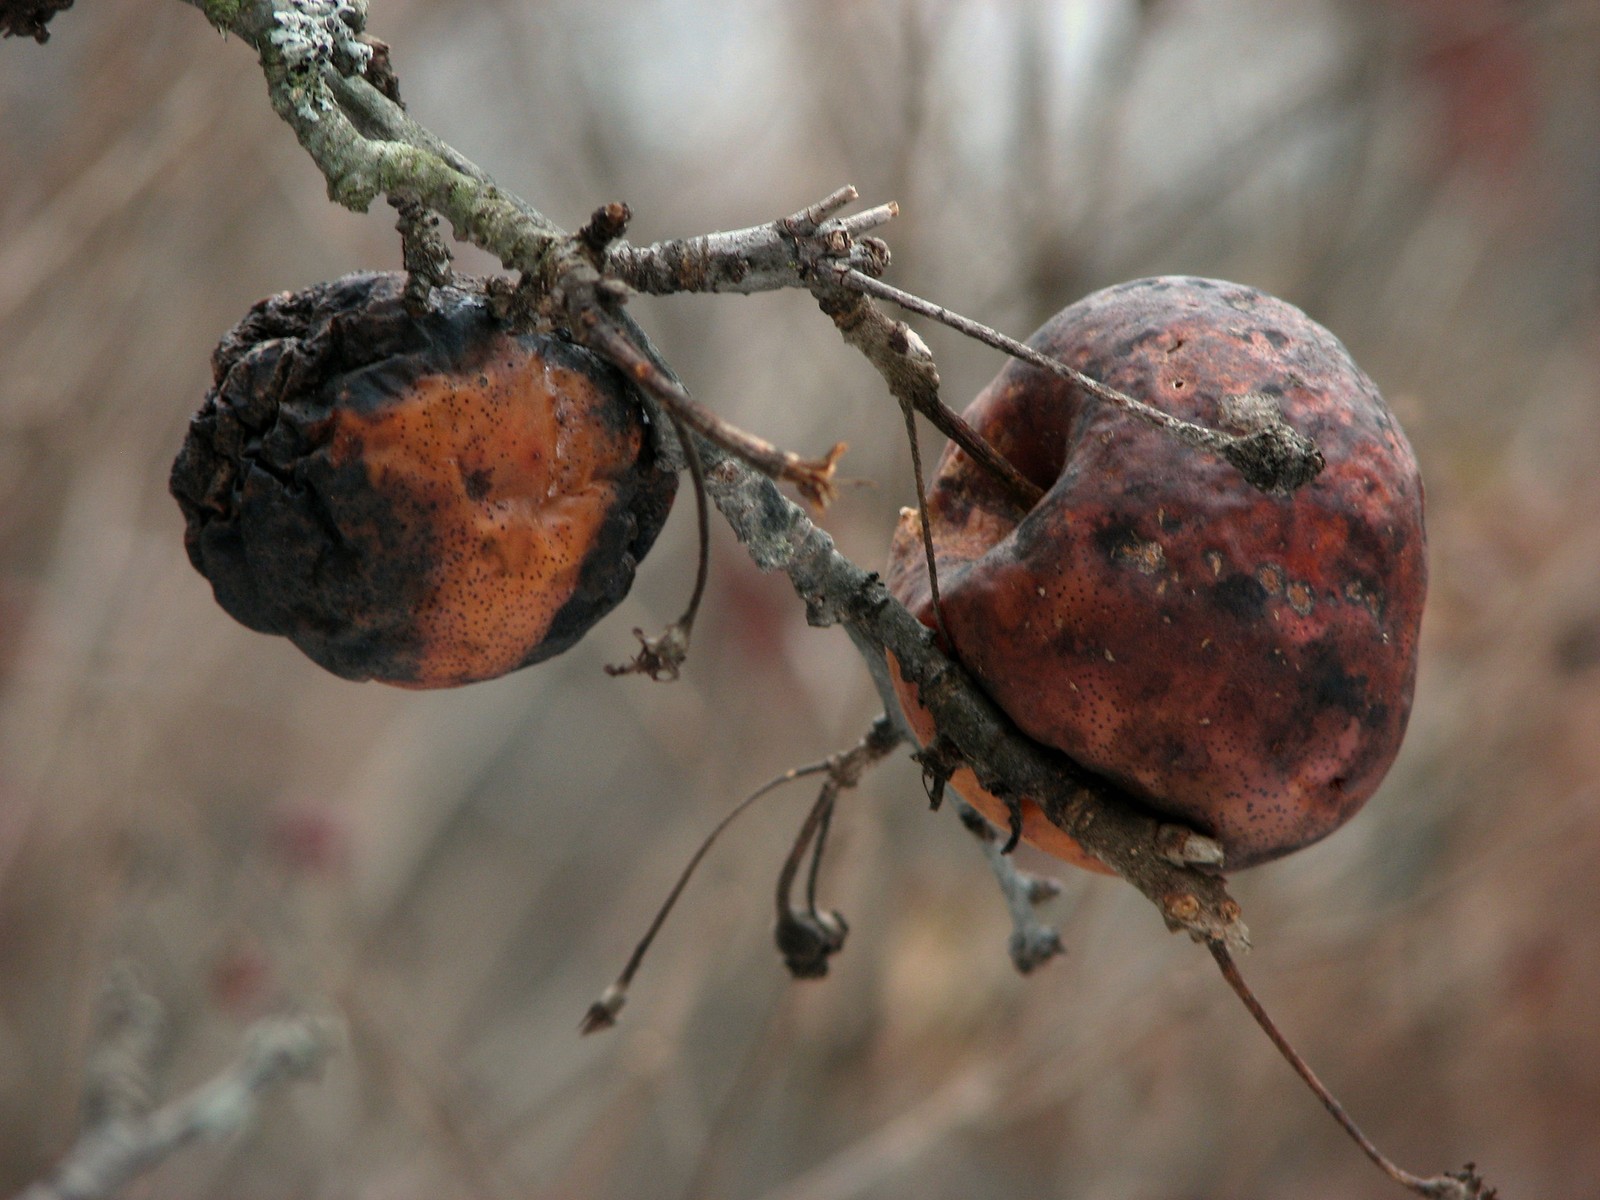 20071209141821 apples gone wild in december for the animals - bald mountain ra.jpg